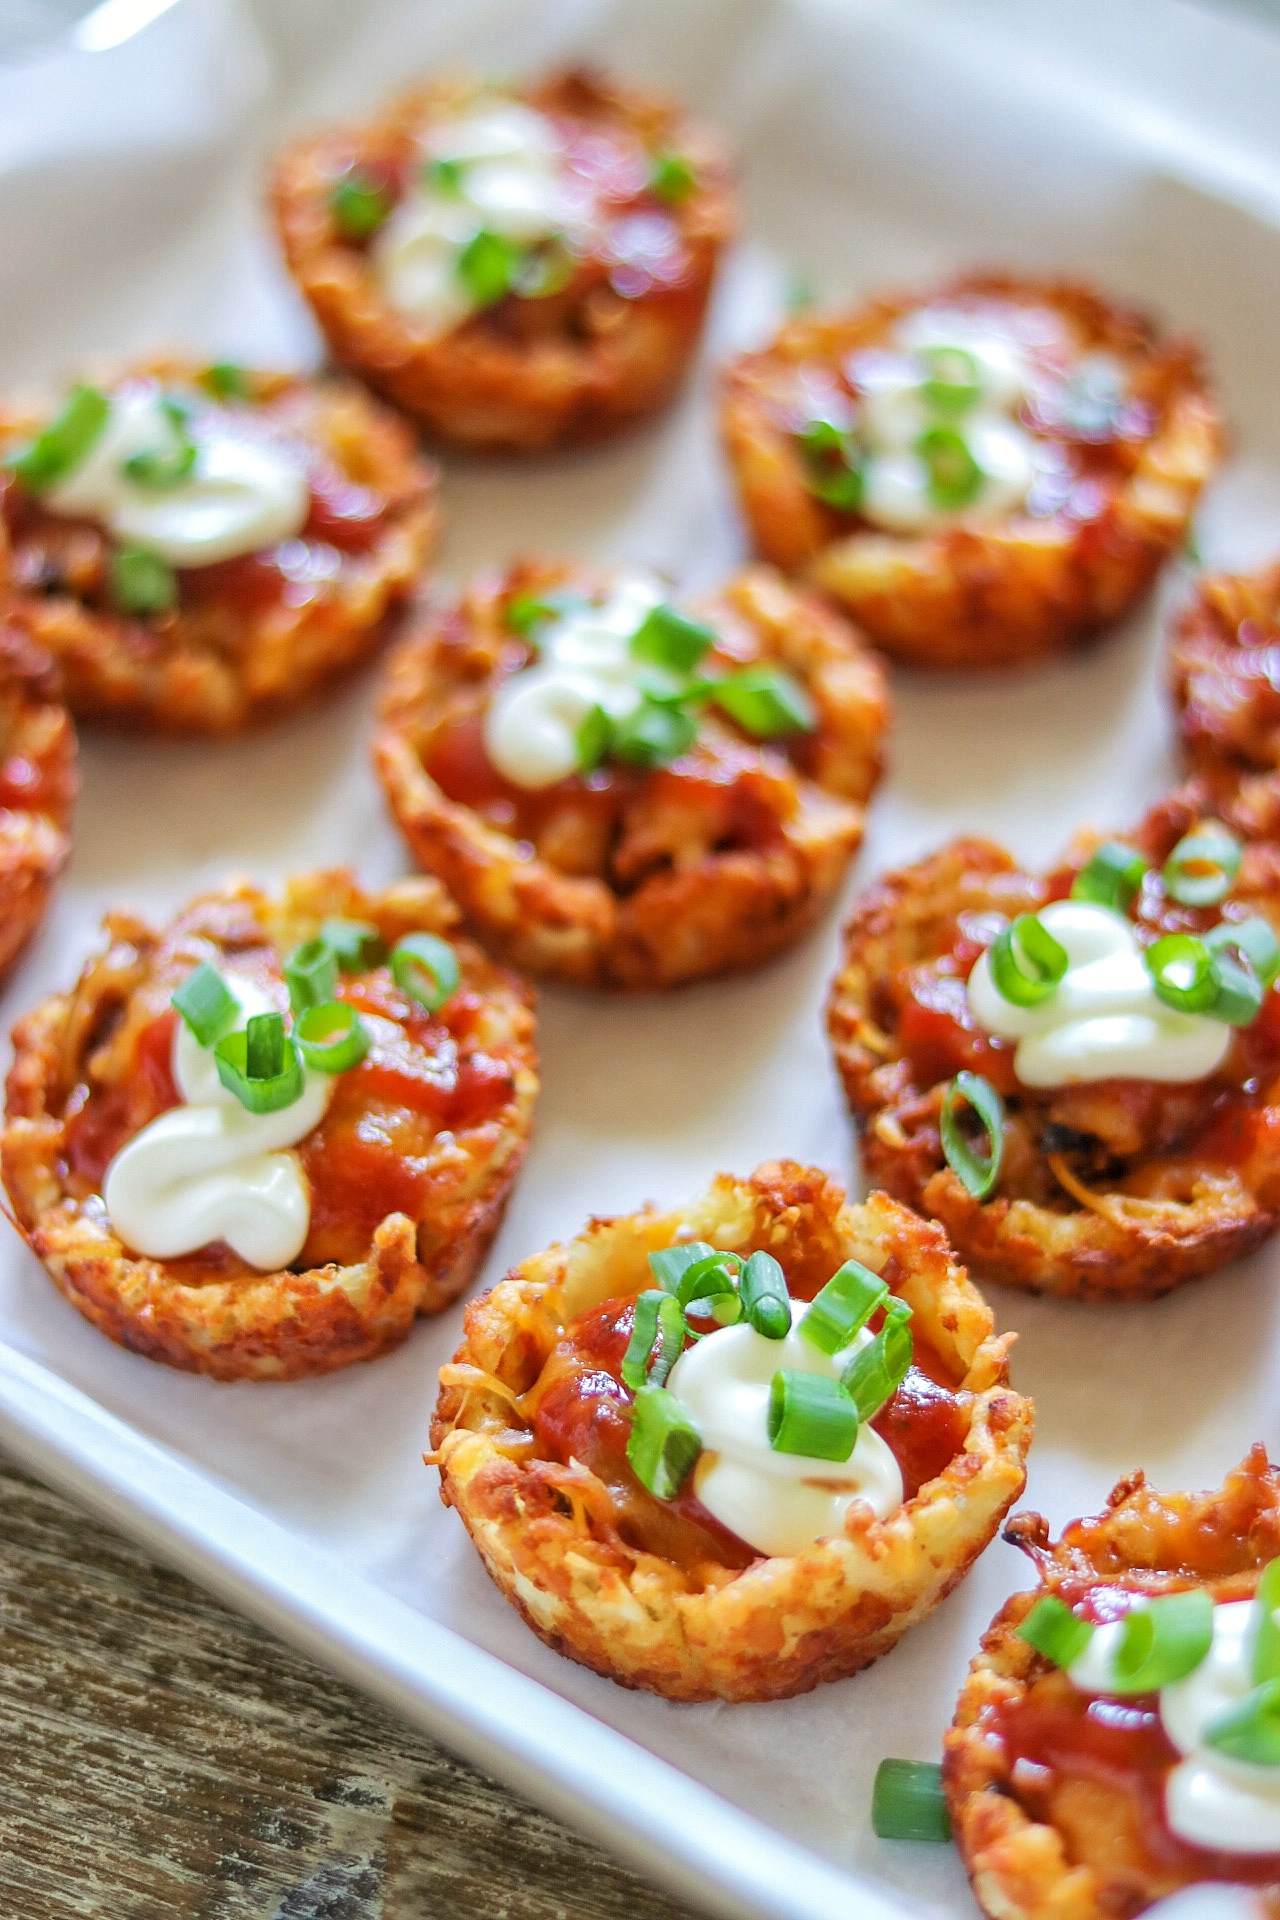 Tater Tot Appetizers - Loaded BBQ Pulled Pork Tater Tots Cups